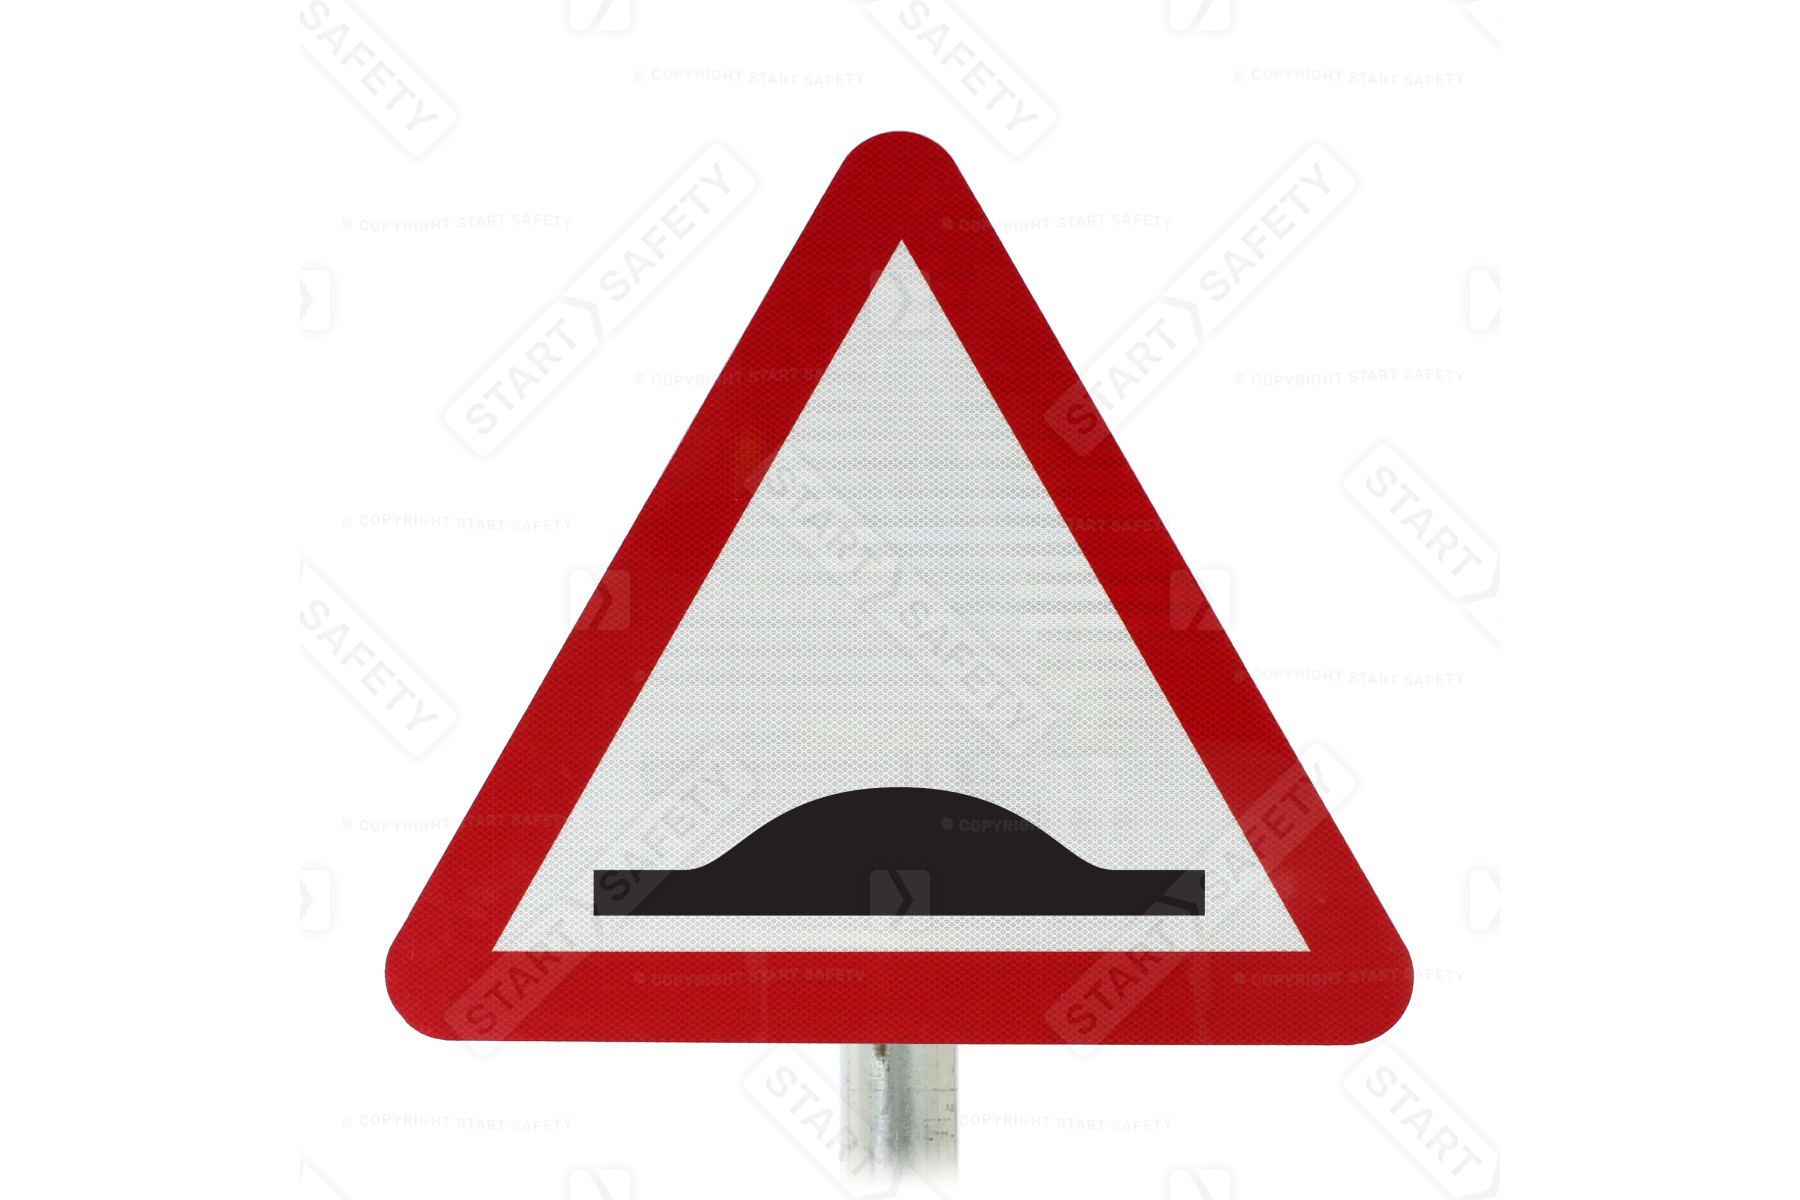 Road Signs On Image & Photo (Free Trial)